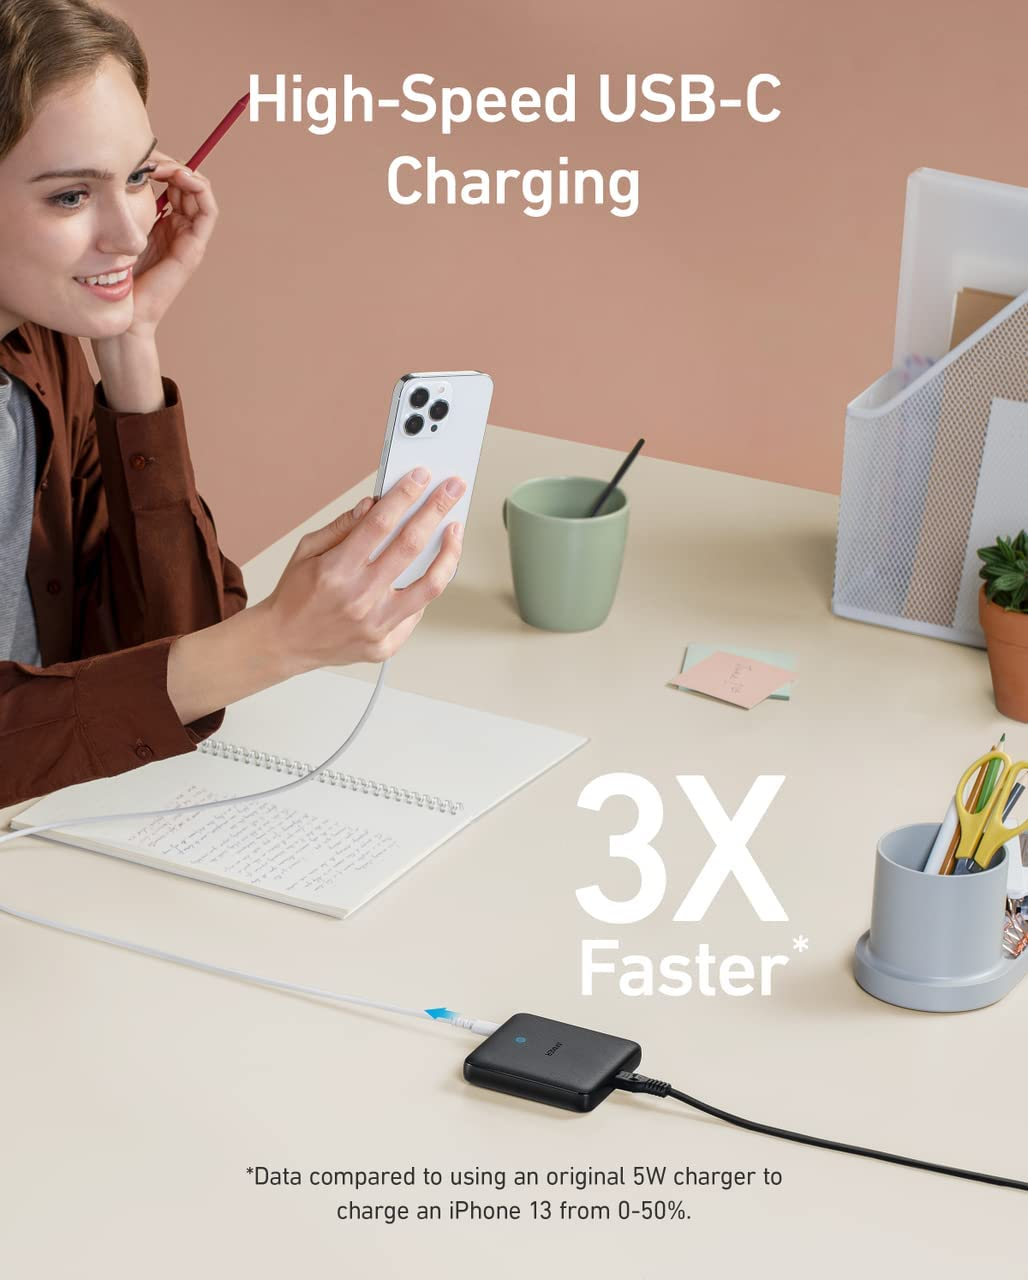 Anker PowerPort Atom III 65W Slim, Dual USB-C and USB-A, PD, PPS, Laptop Charging